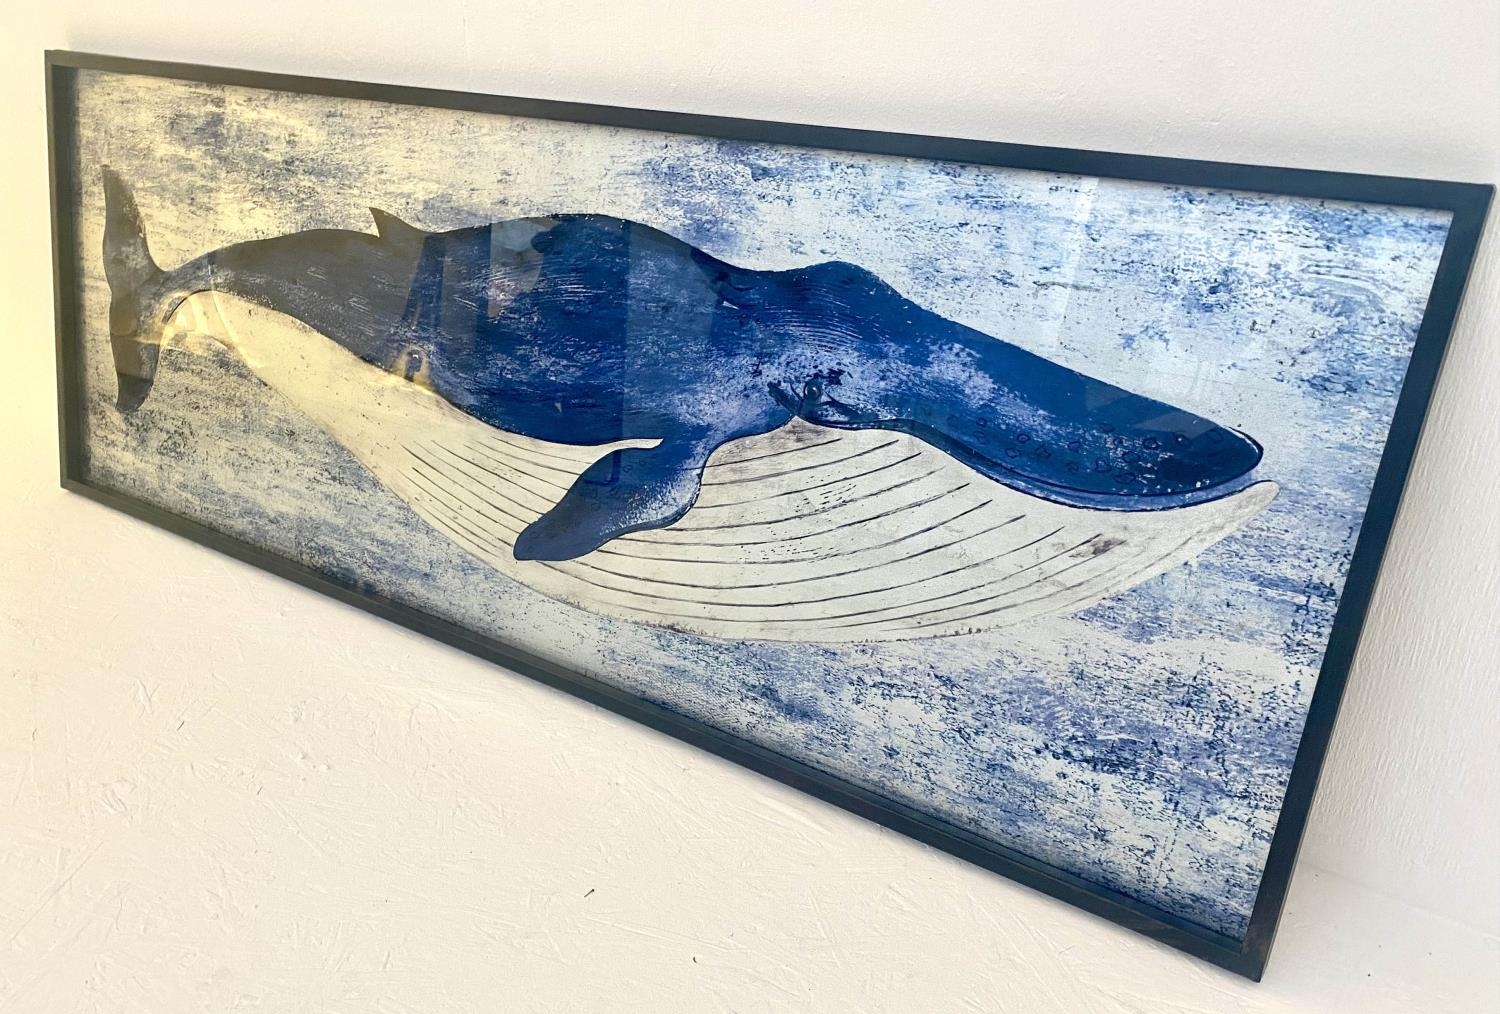 CONTEMPORARY SCHOOL STUDY OF A WHALE, 44cm x 120cm, framed. - Image 2 of 3